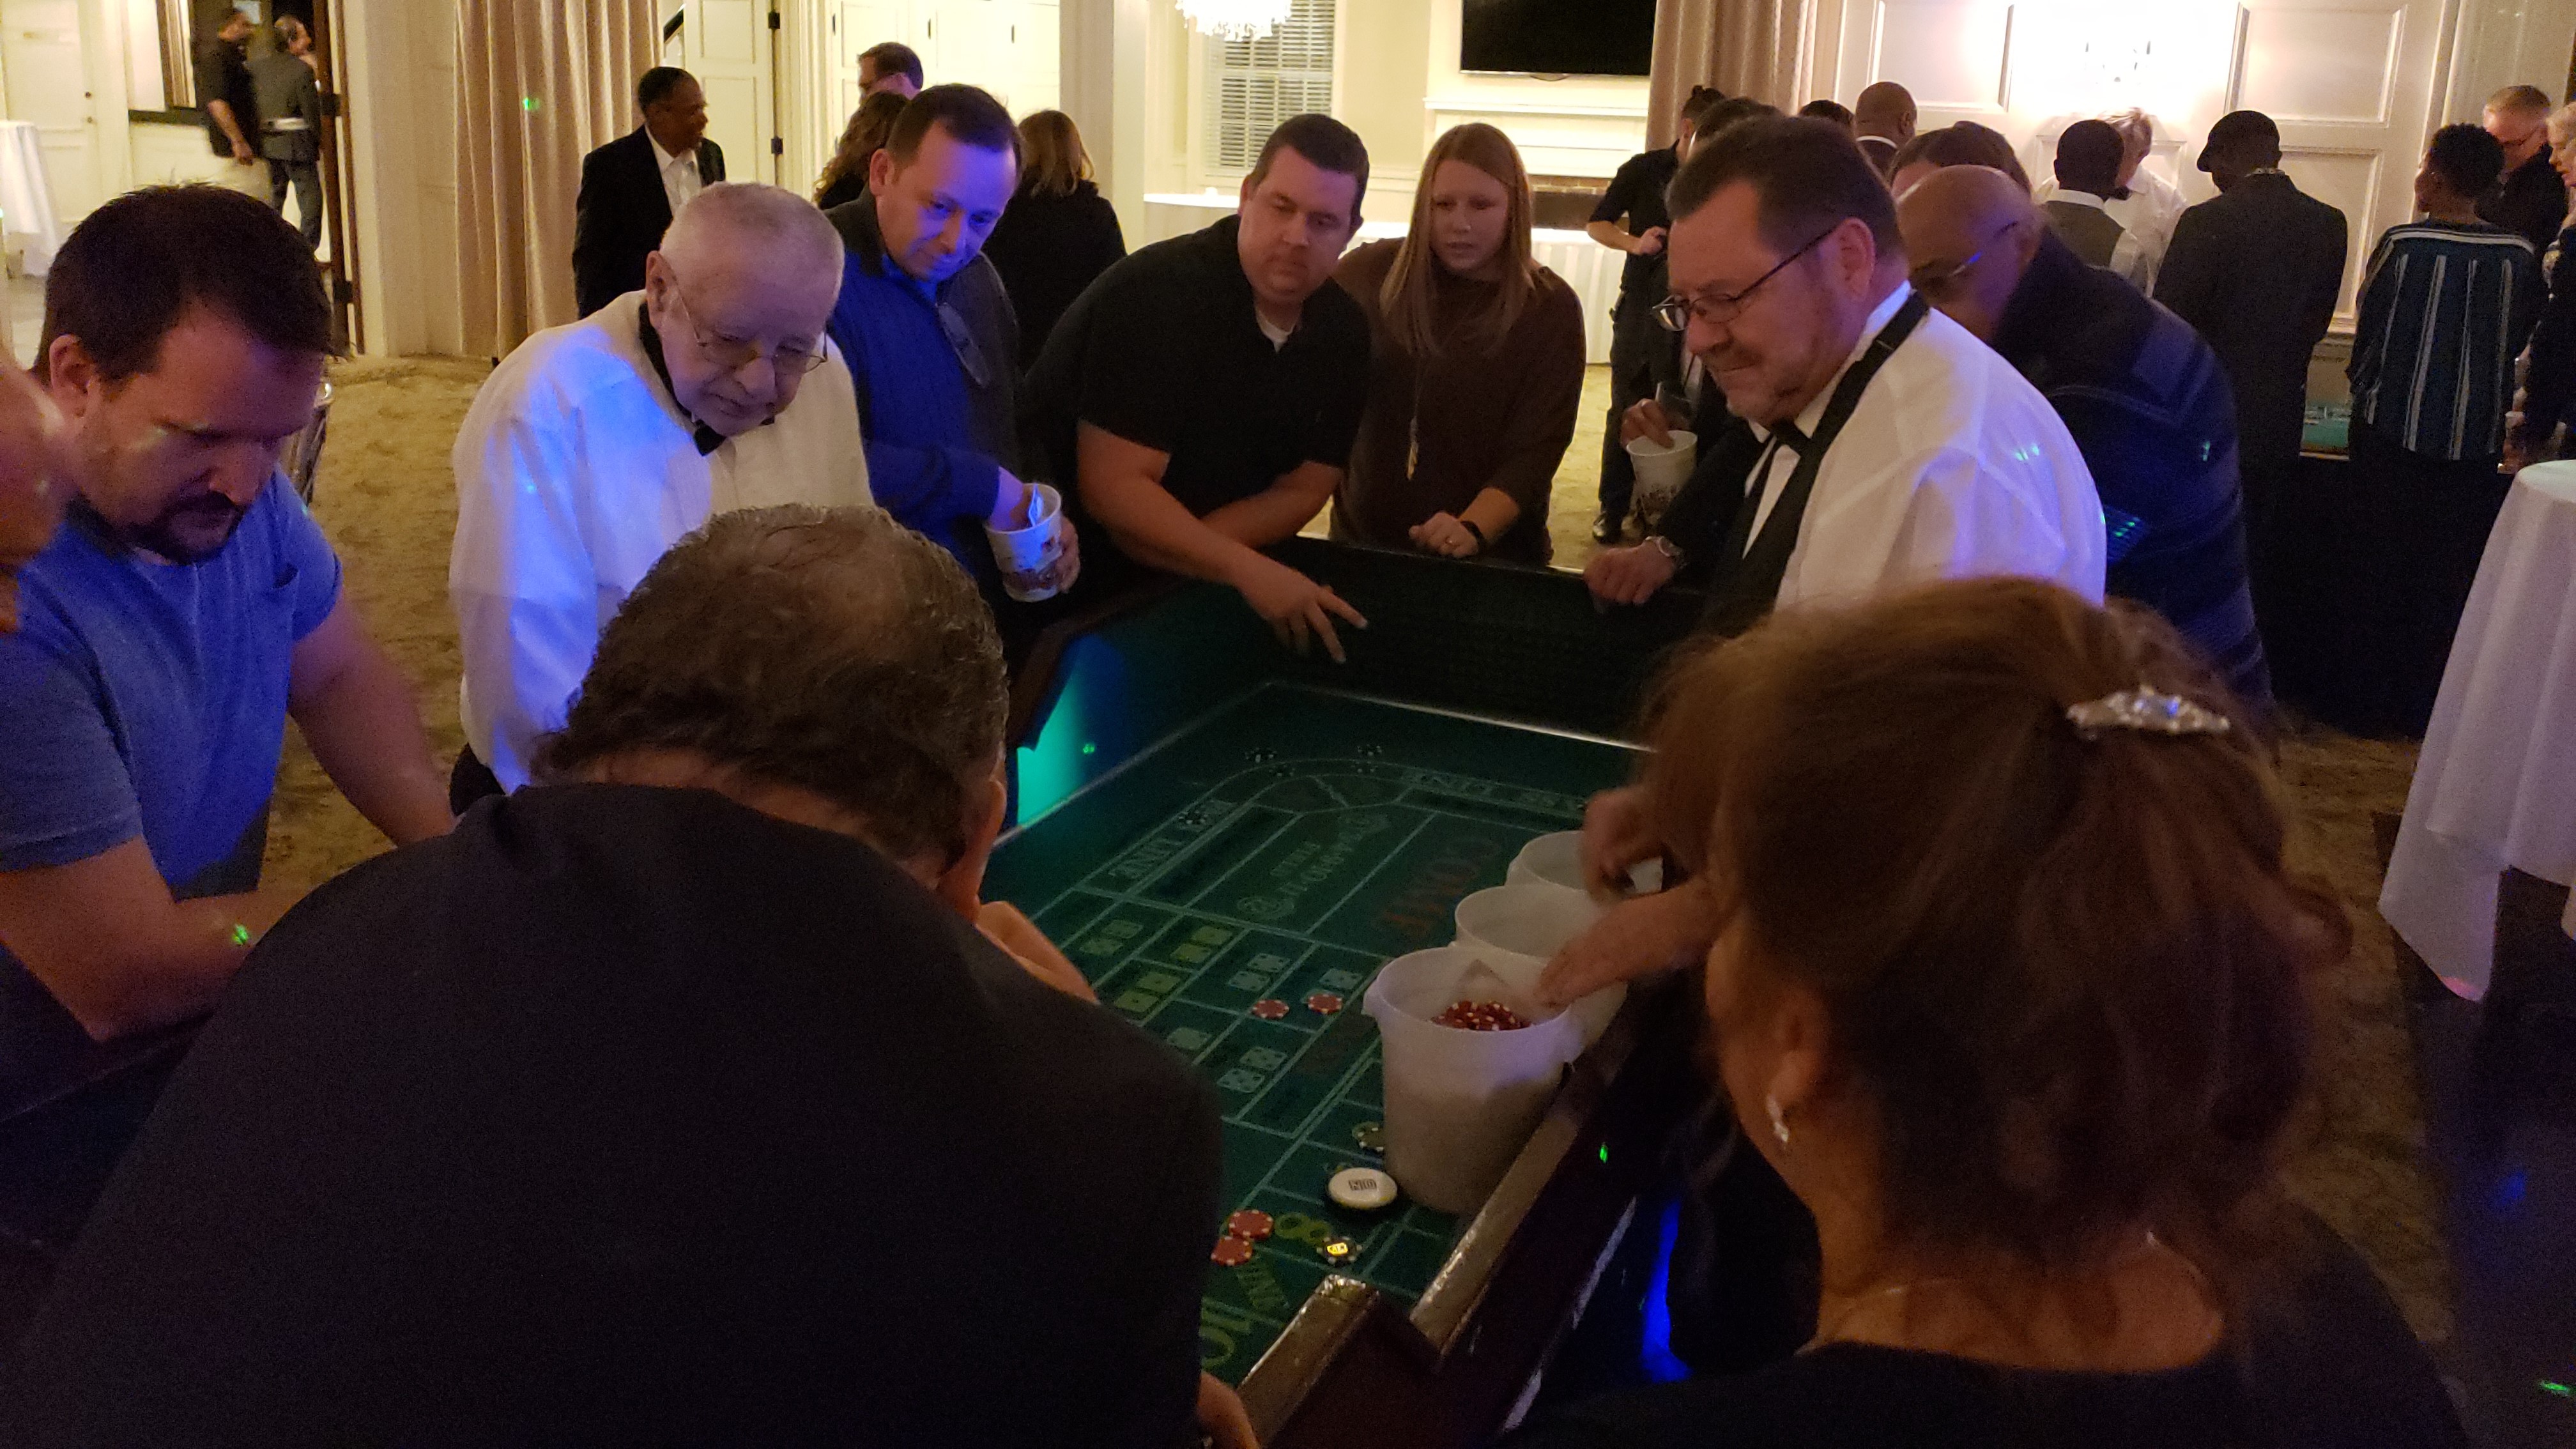 Casino night party rentals, corporate entertainment, holiday party rentals